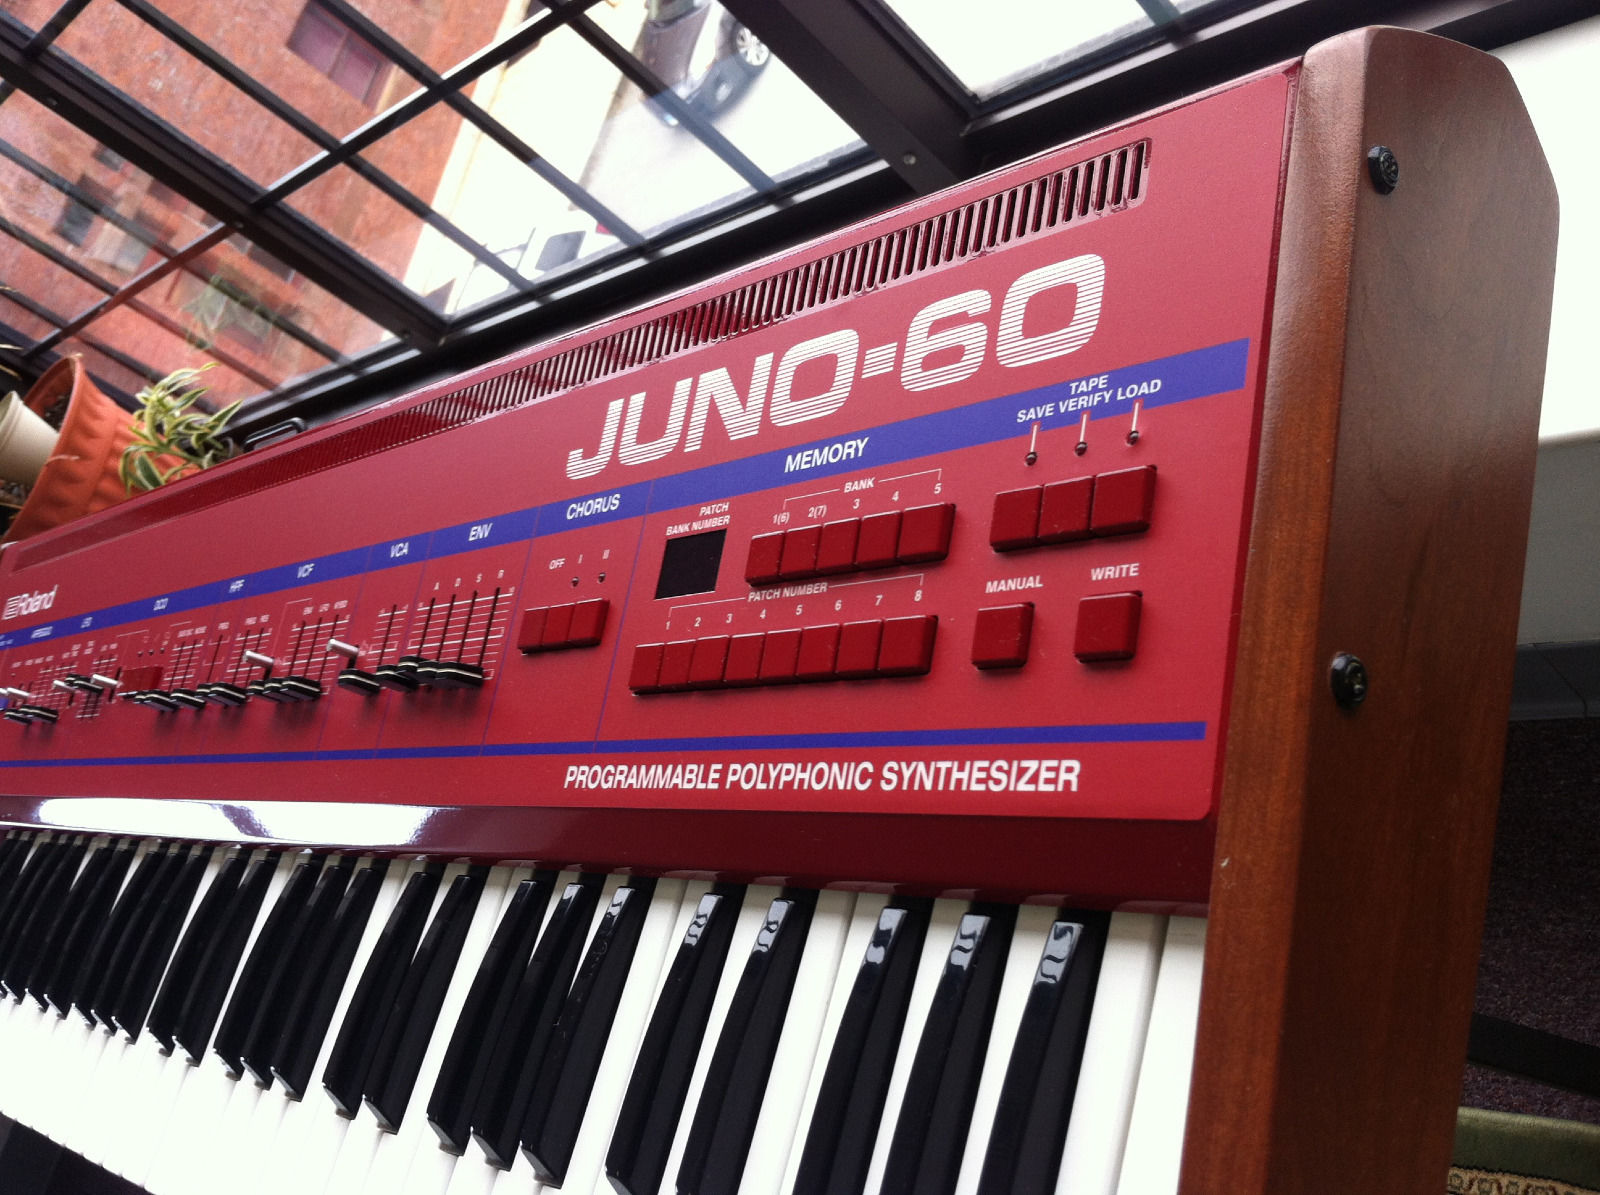 Custom Red Roland Juno 60 Synthspa Allen Coppock Vintage Synthesizer Restoration Recommended - my roland juno 60 roblox